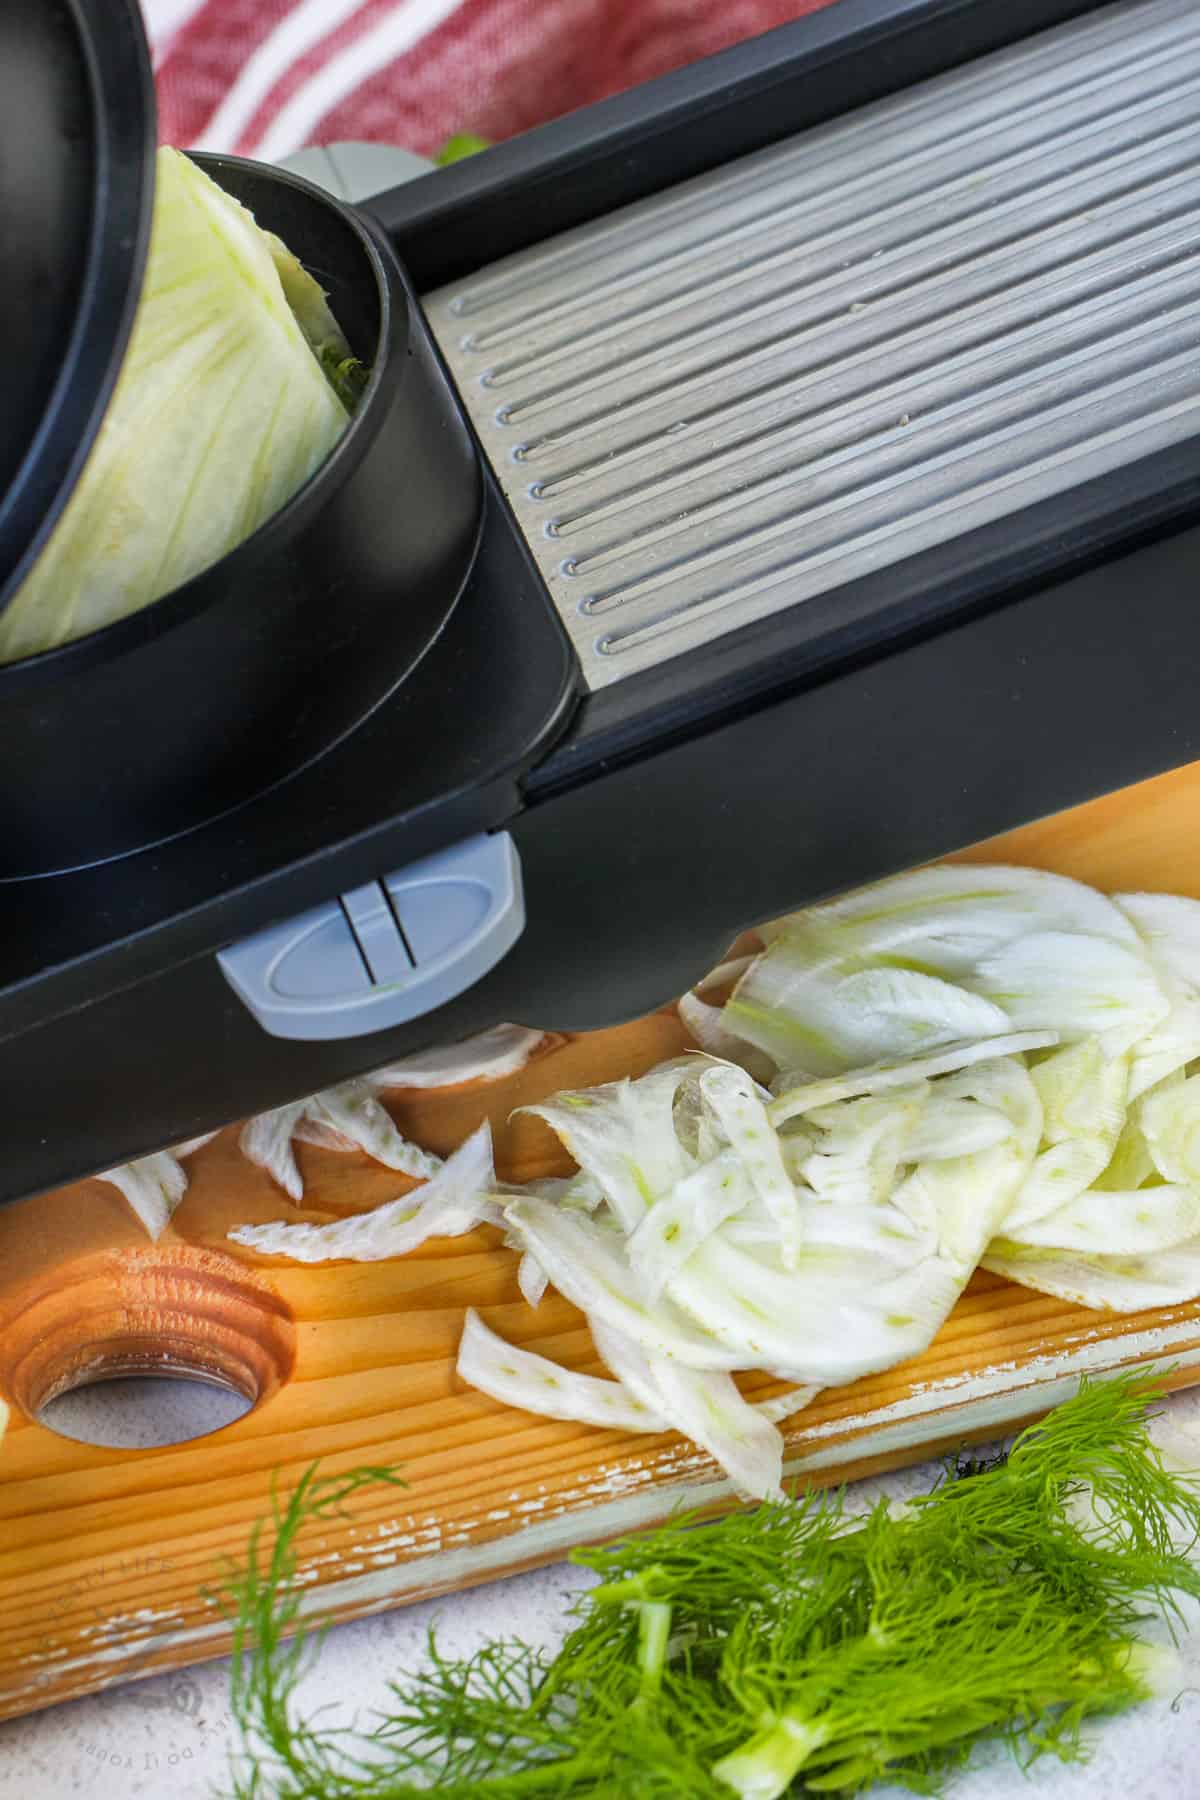 grating an onion to make Fennel Salad